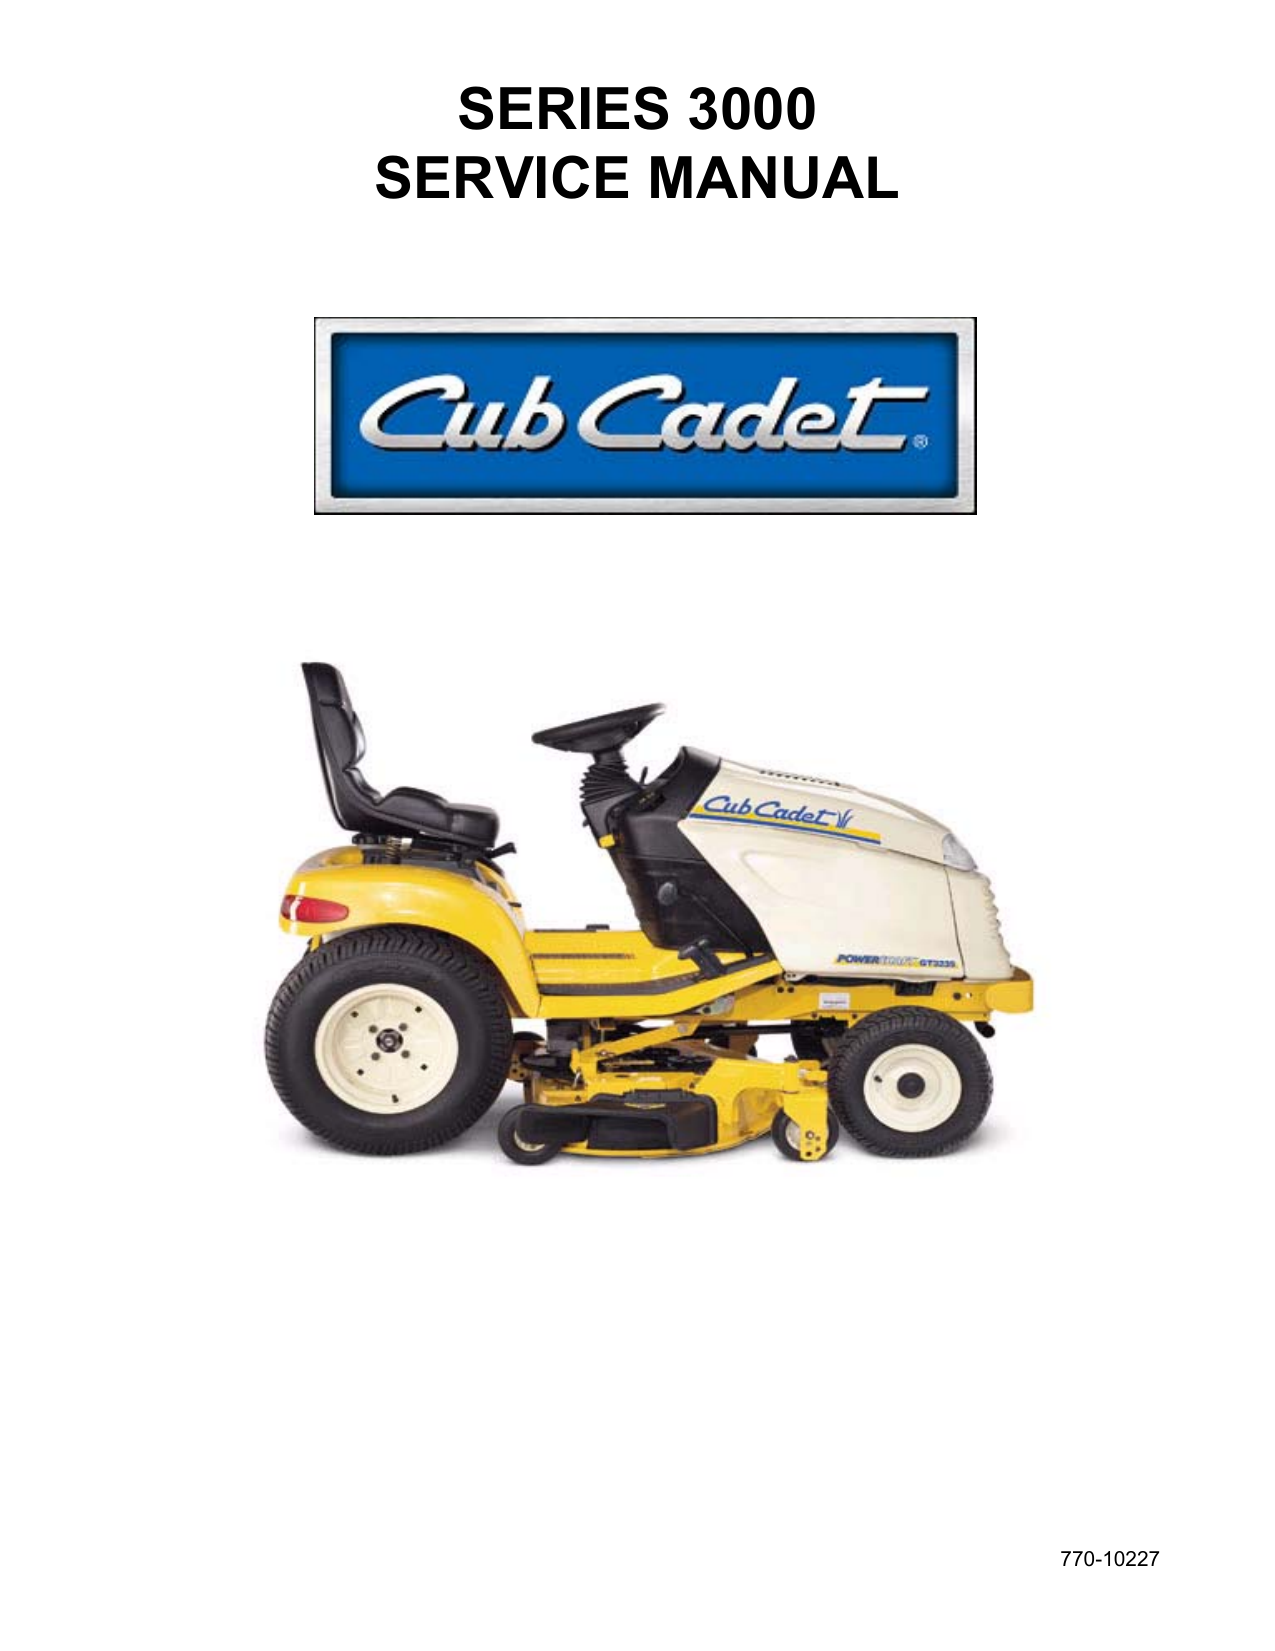 1998-1999 Cub Cadet 3165, 3185, 3186, 3205, 3225 riding mower tractor manual Preview image 2